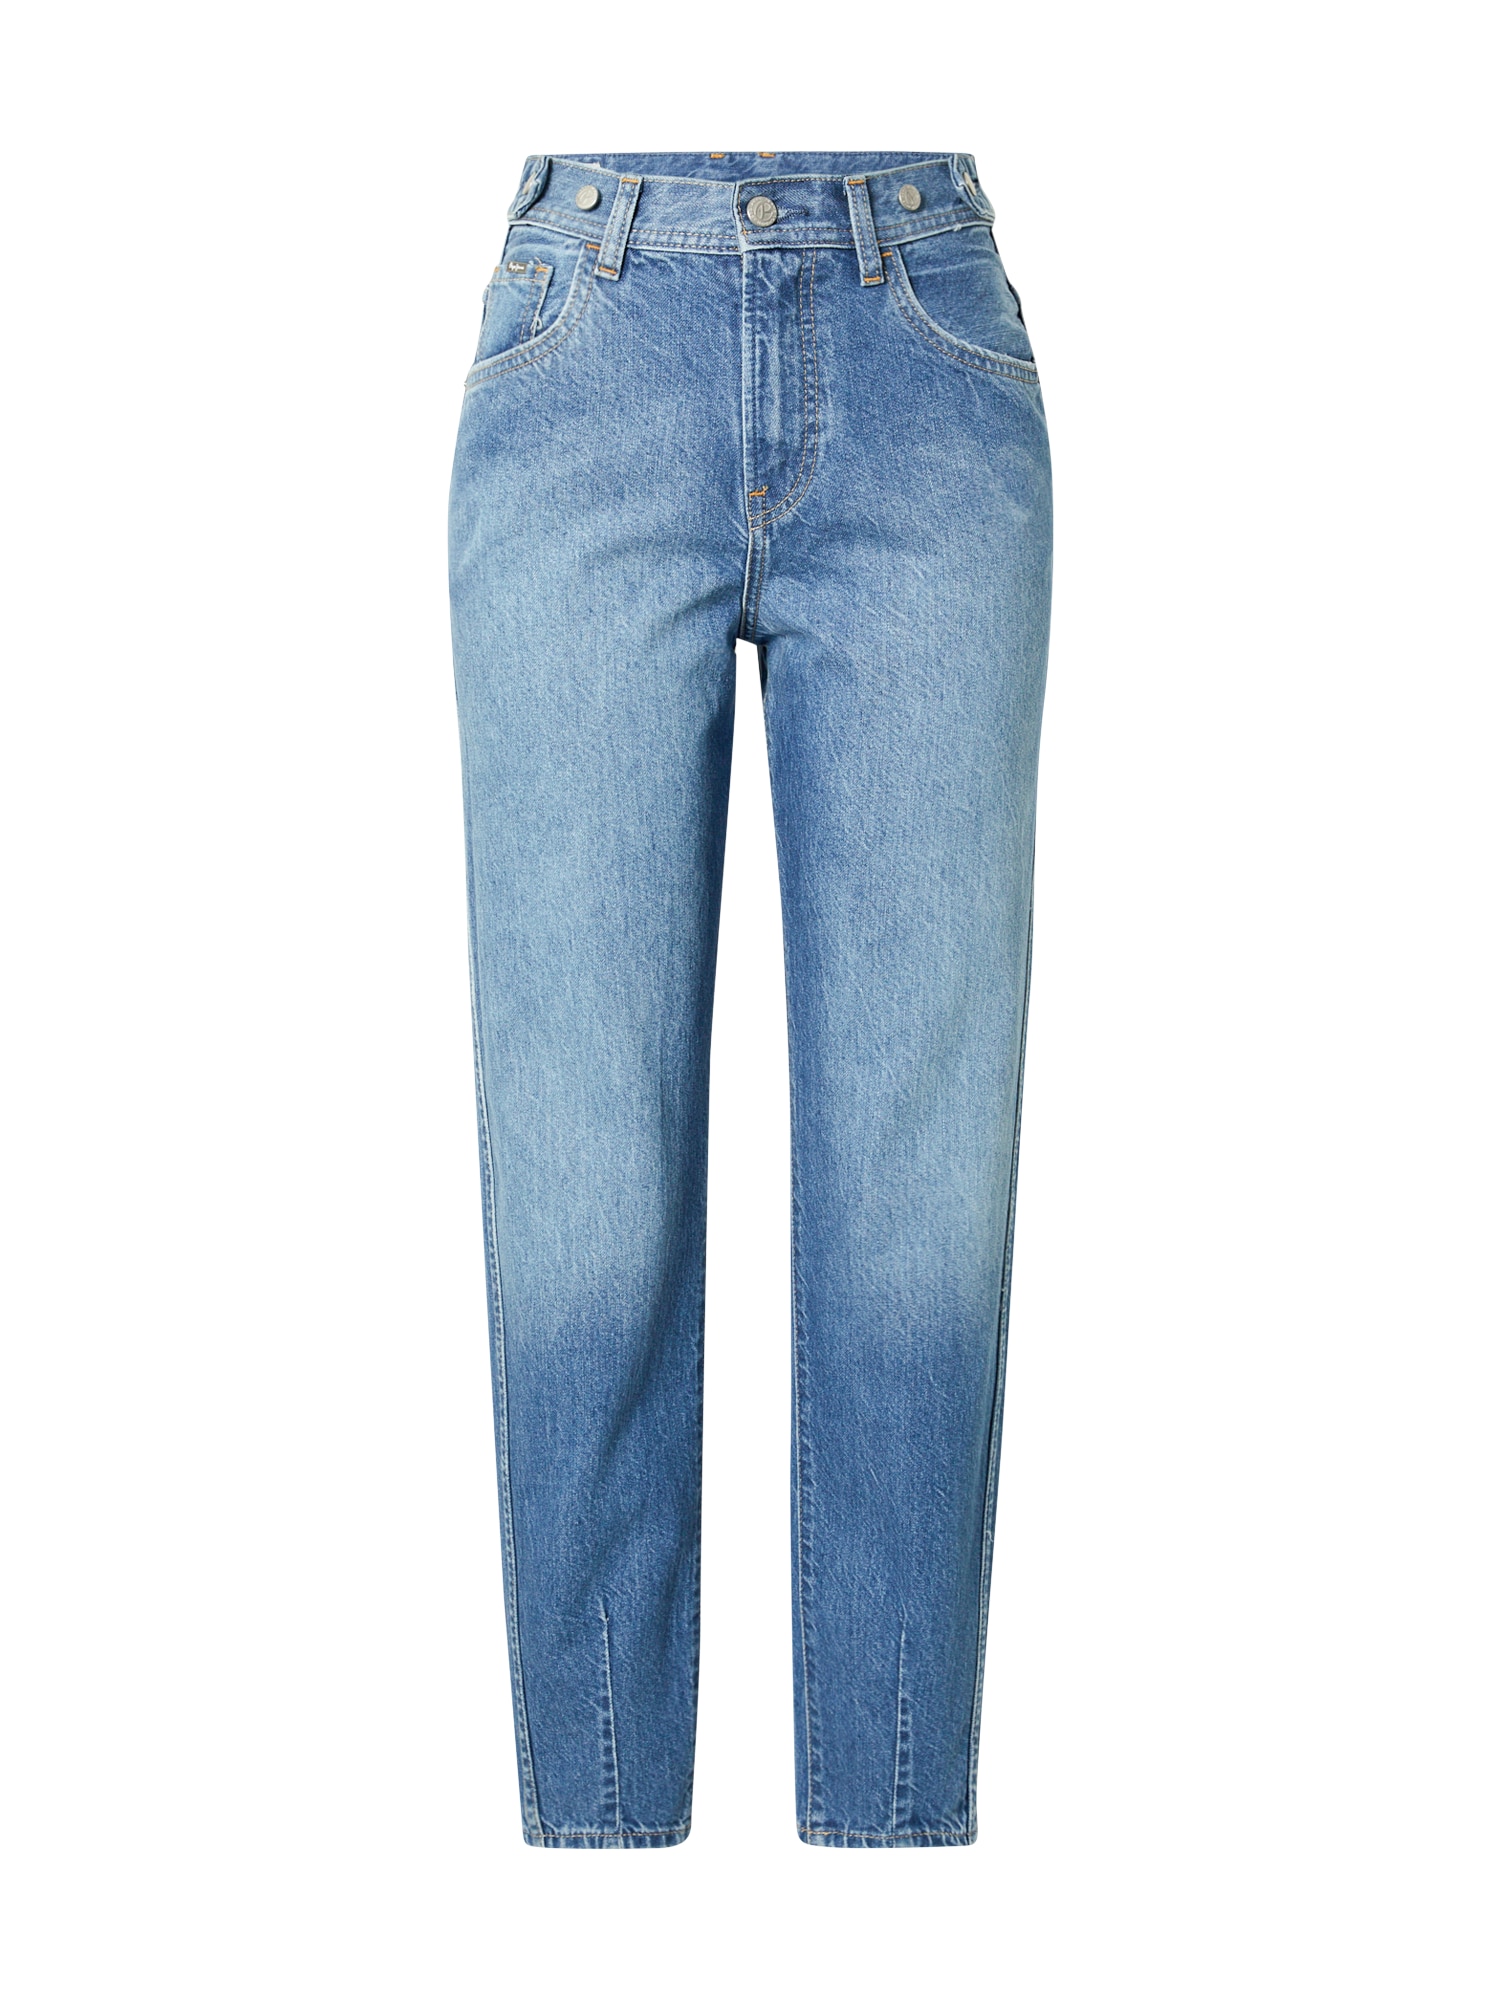 Jeans 'AVERY' von Pepe Jeans